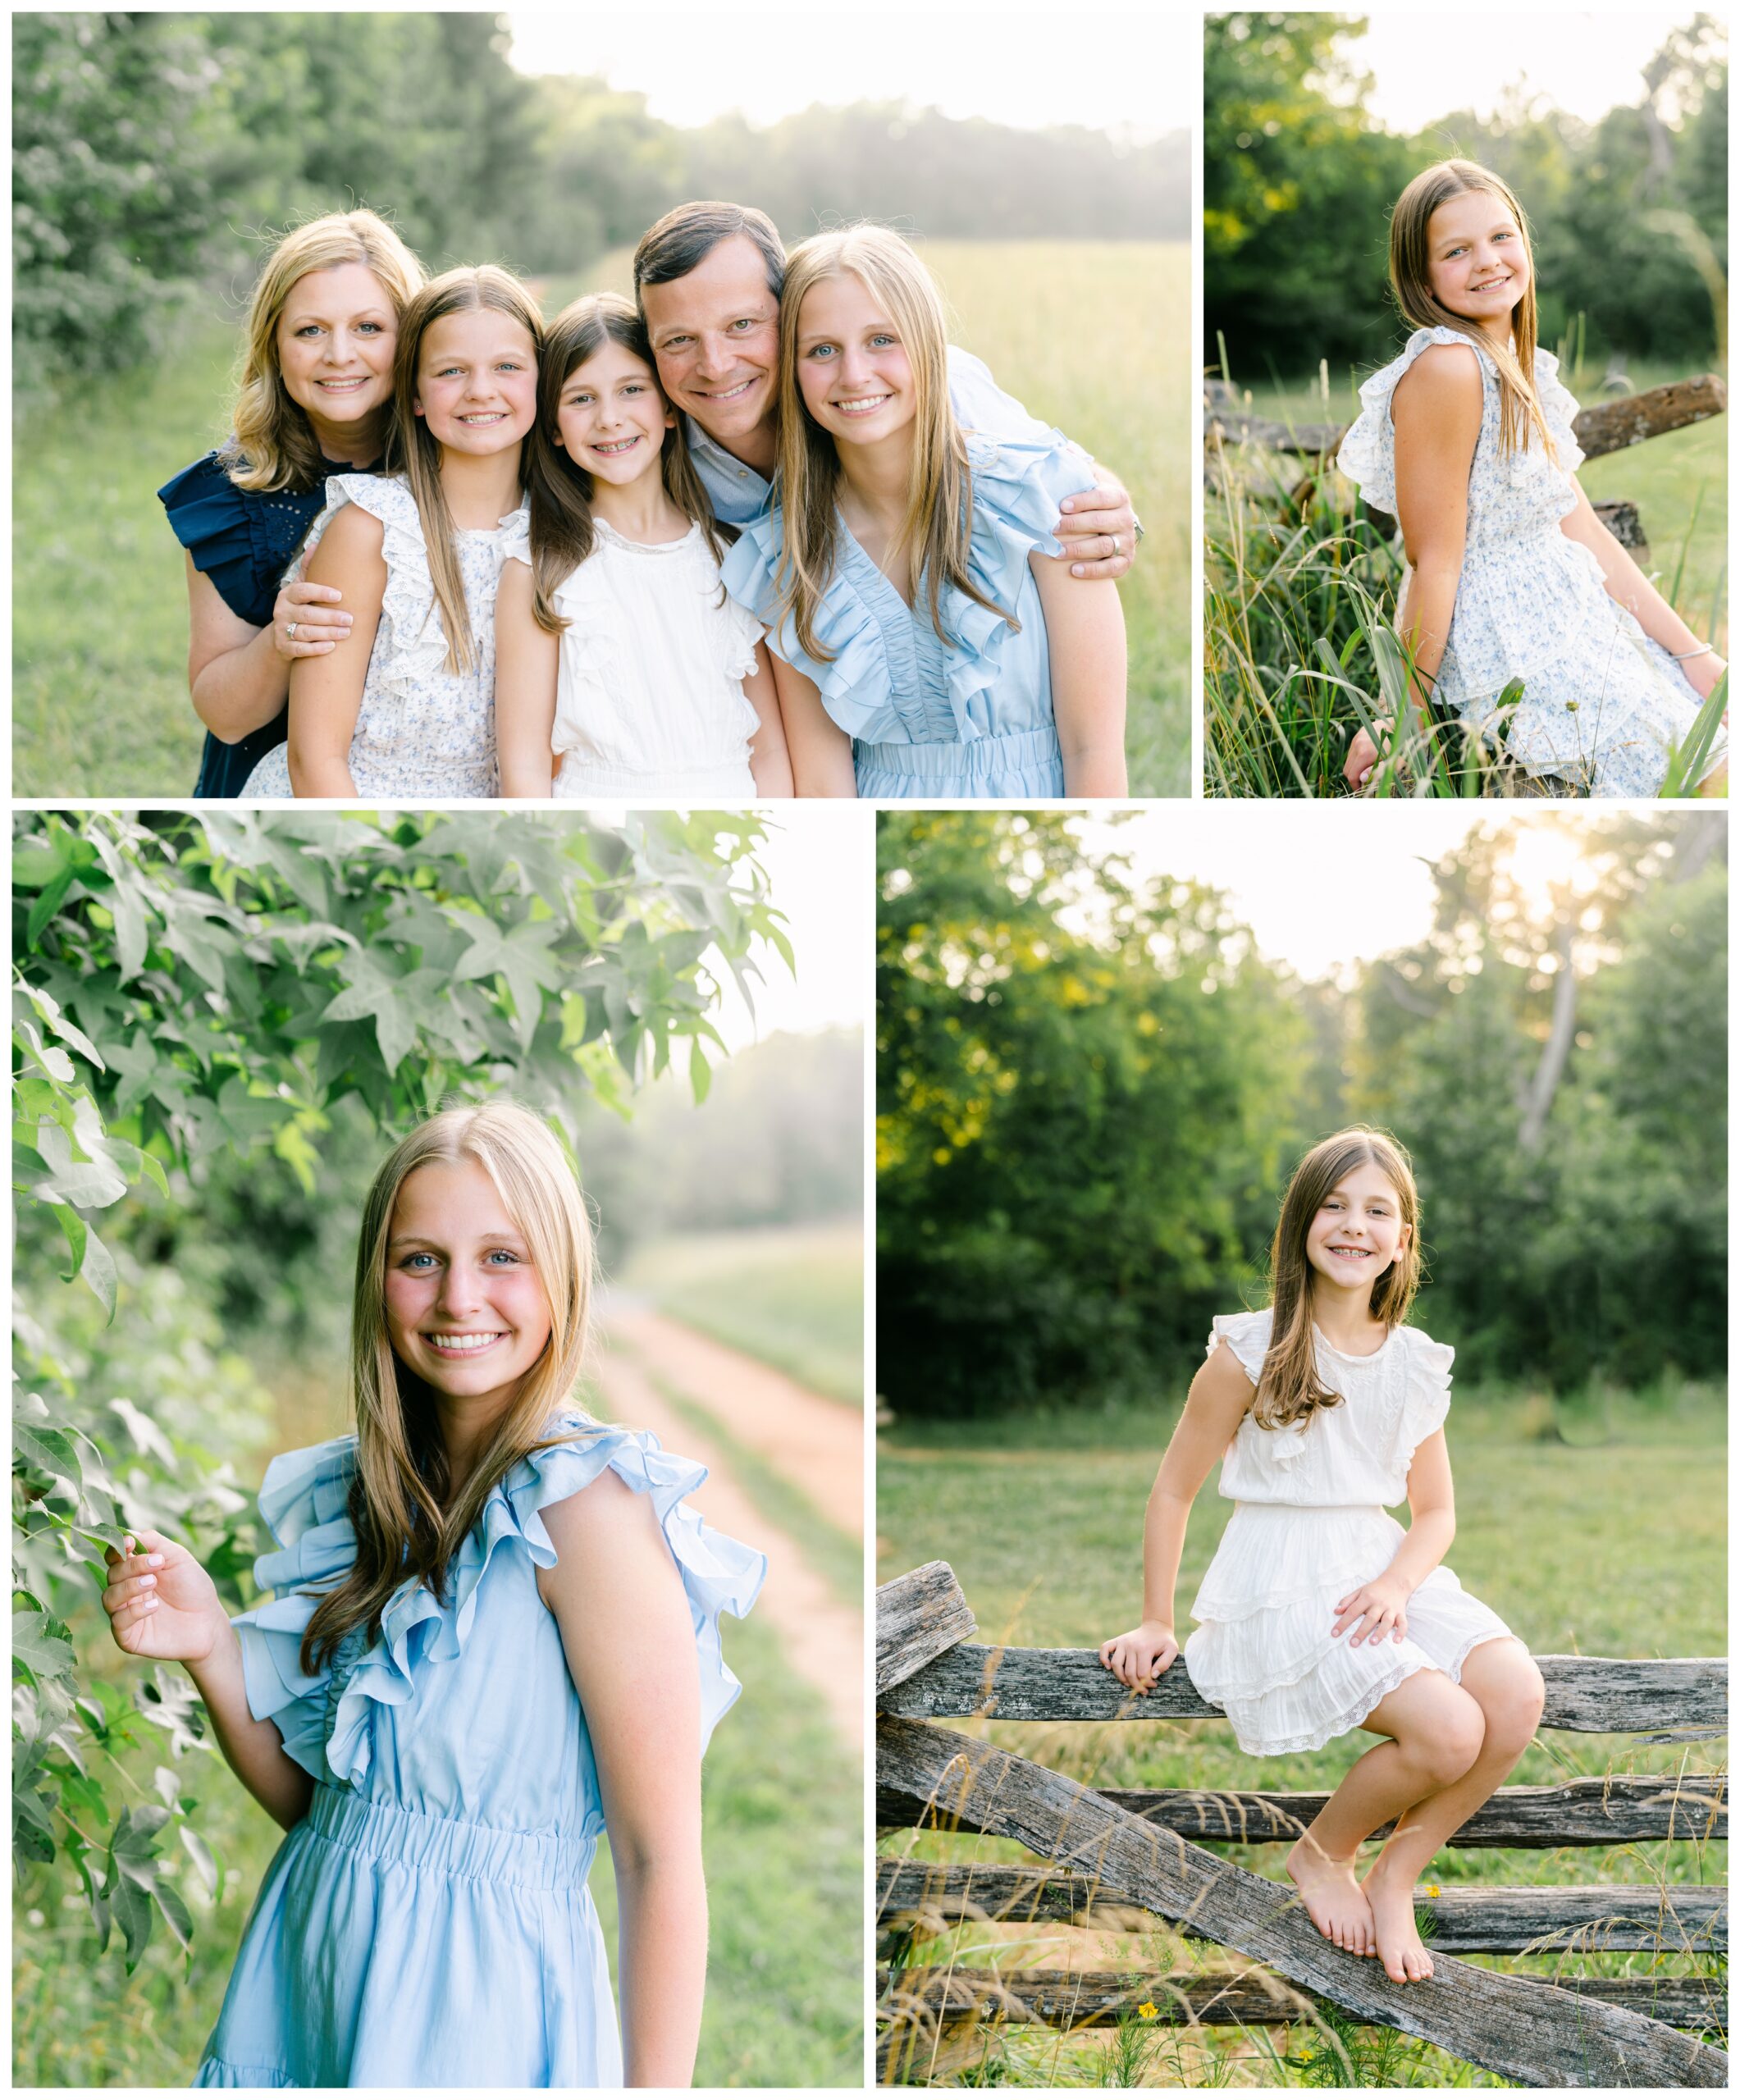 Portraits of a family posing in a field of green grass.